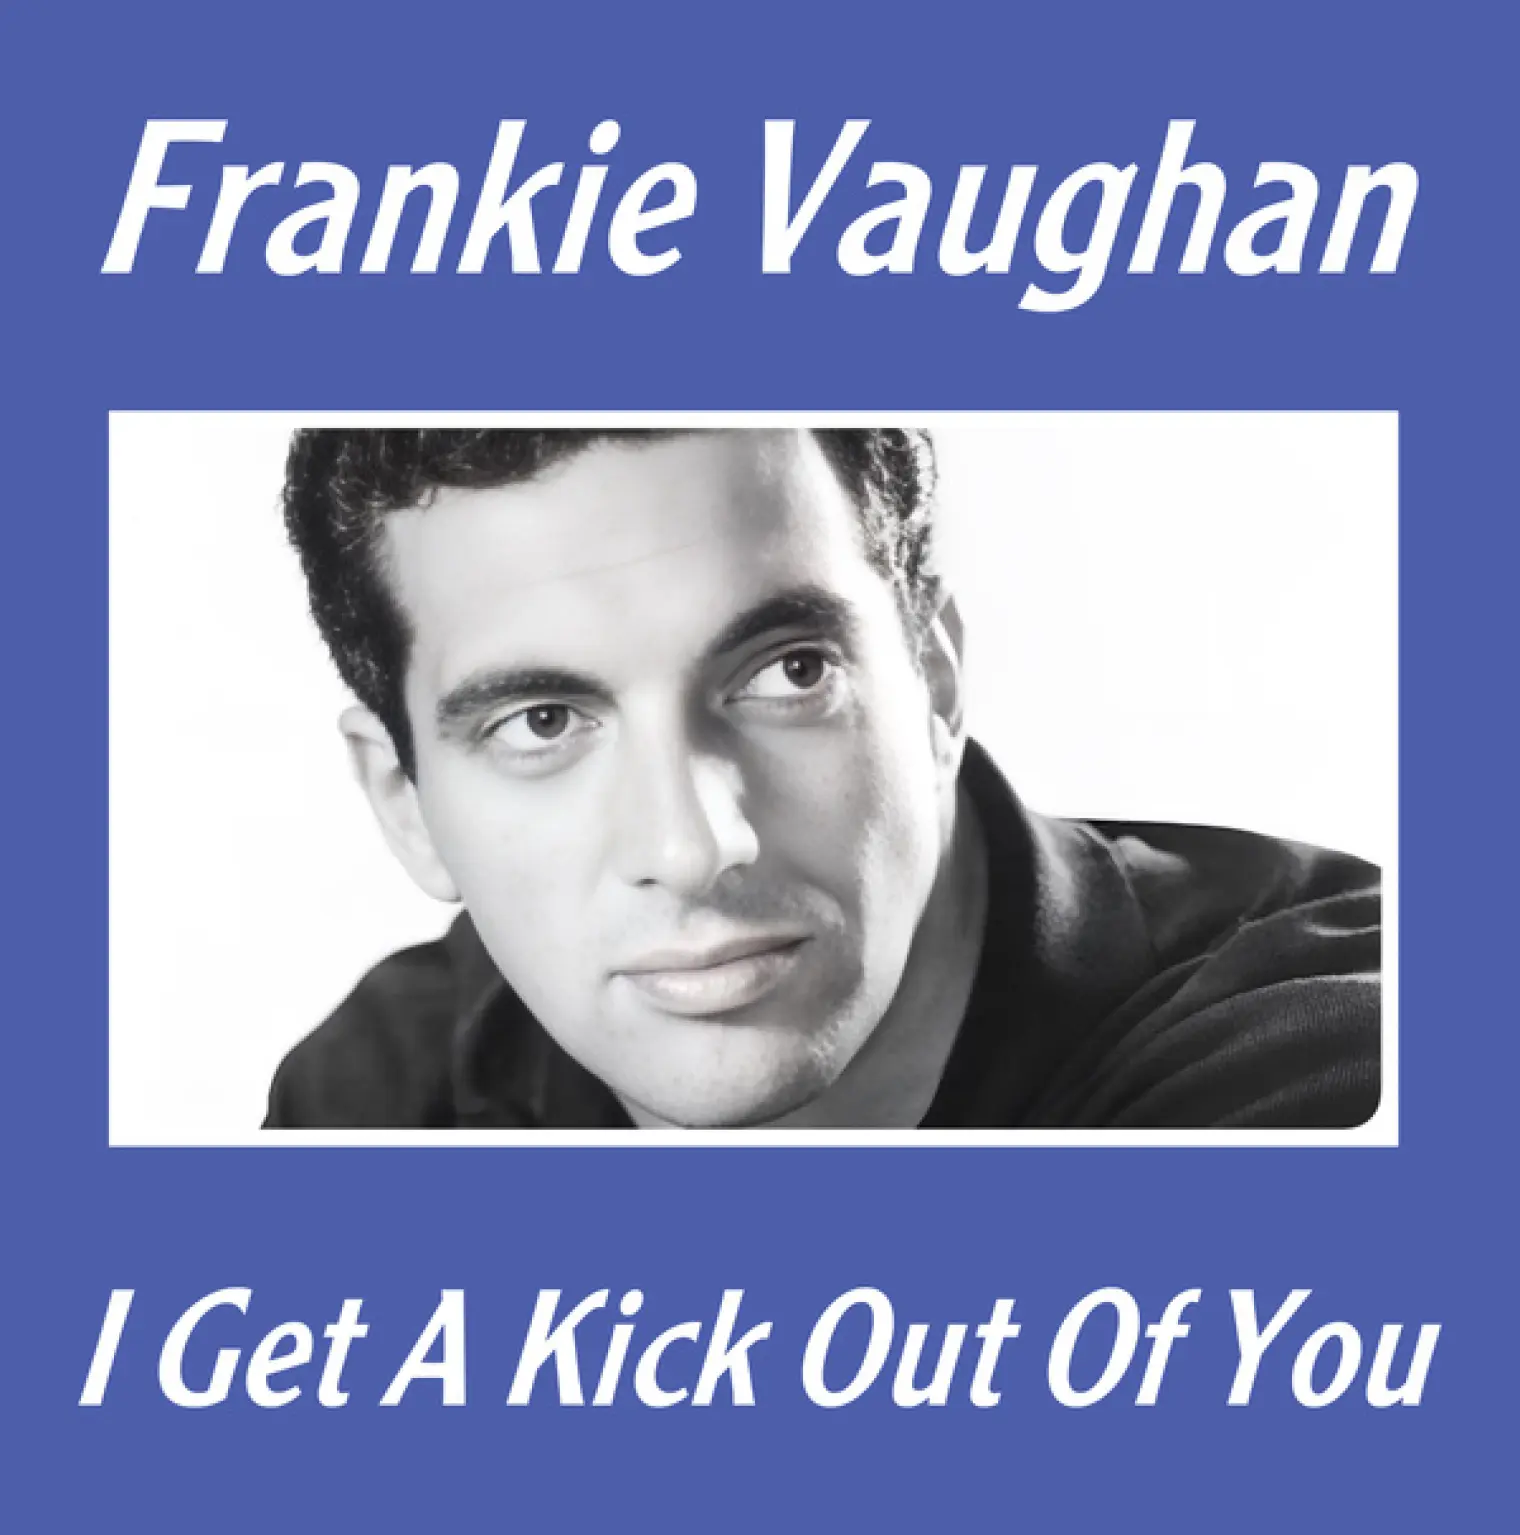 I Get A Kick Out Of You -  Frankie Vaughan 